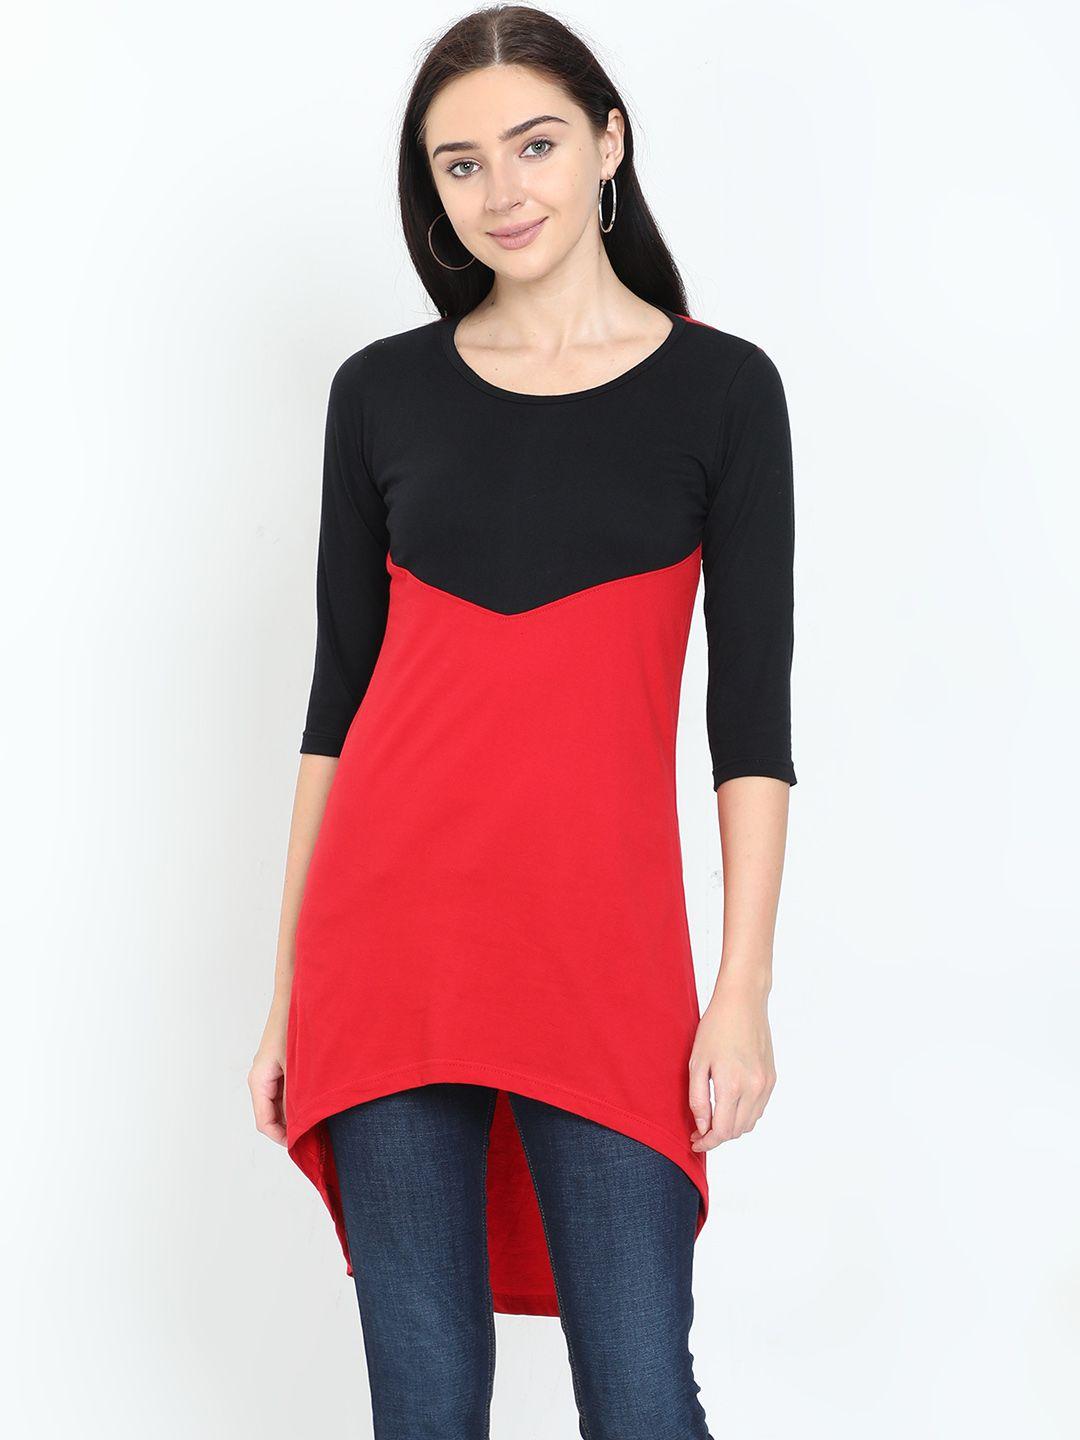 fleximaa red & black colourblocked high-low longline pure cotton top